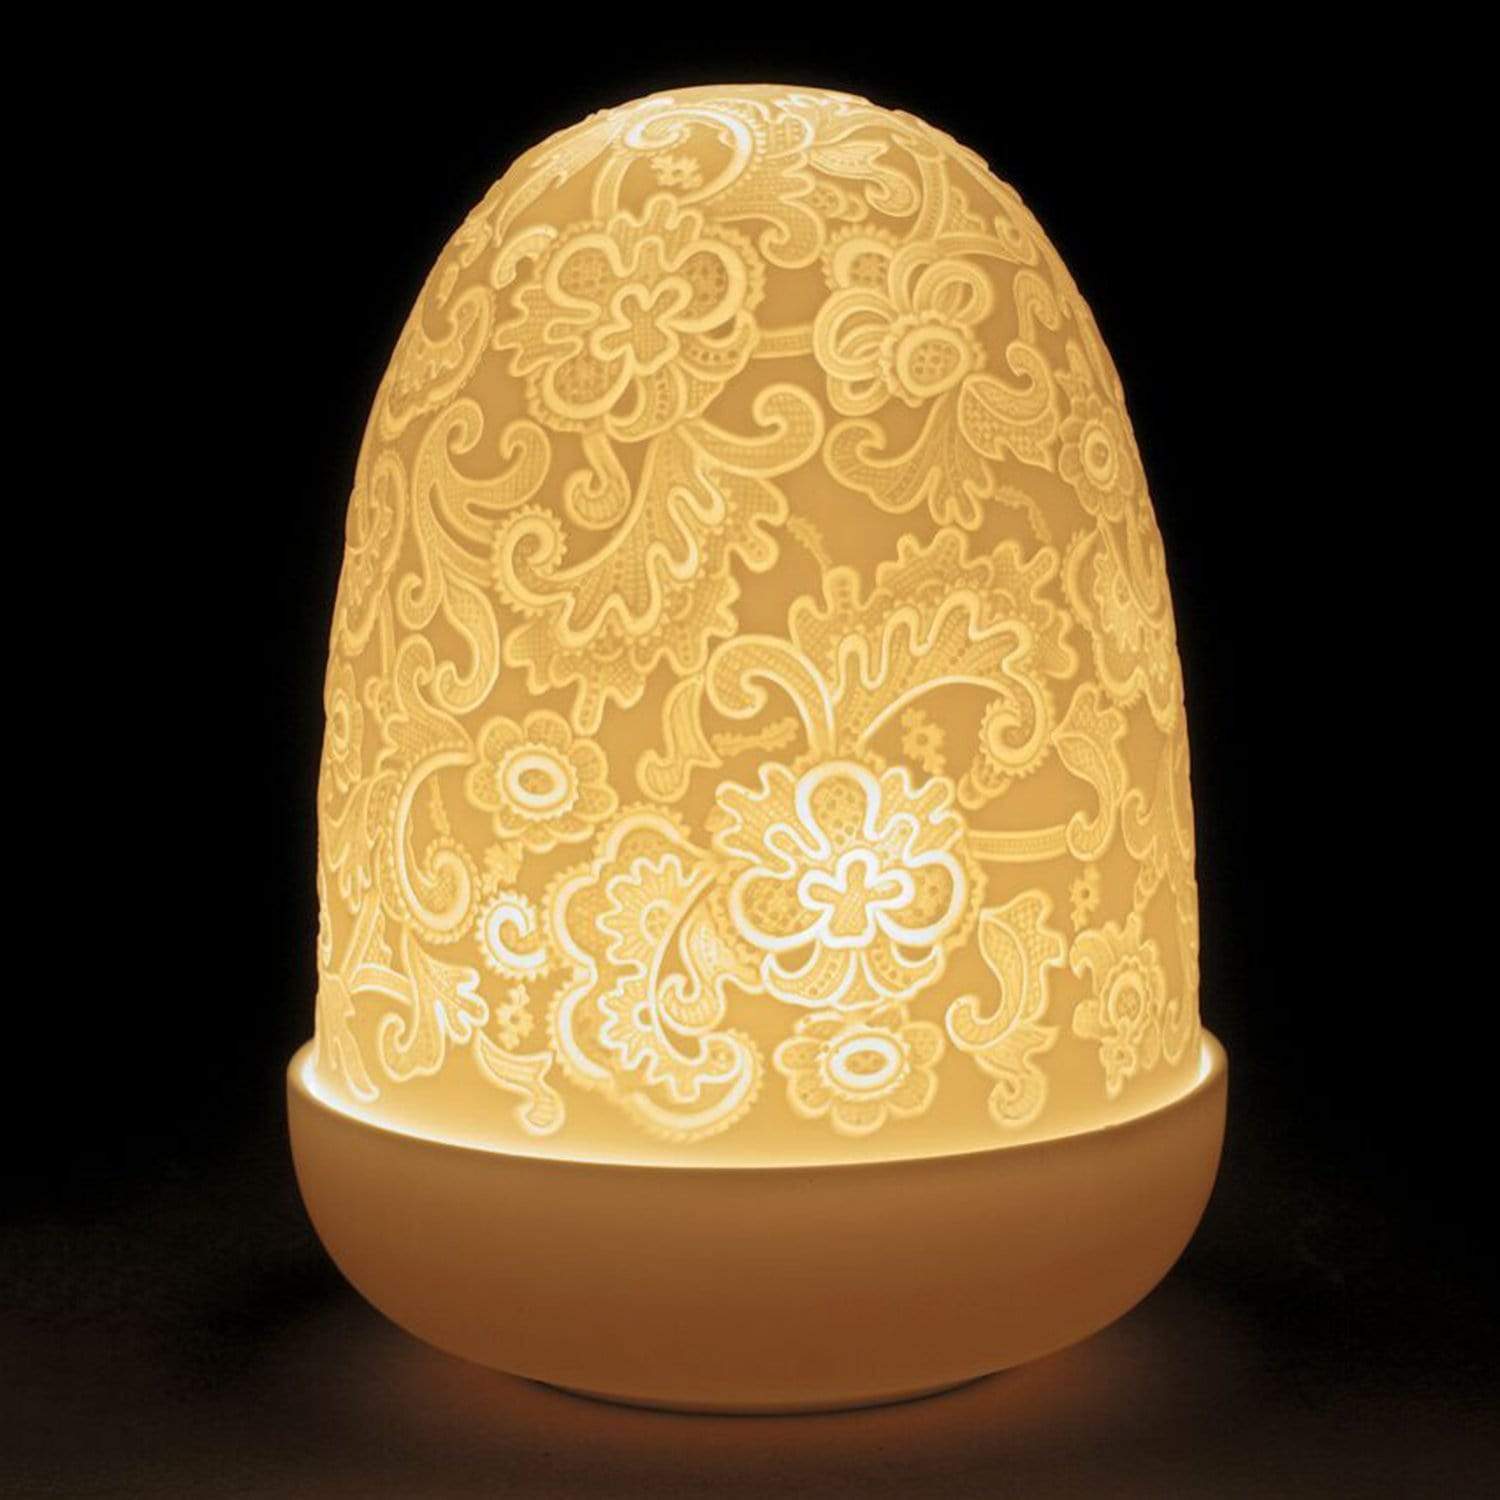 Lladro Lace Dome Table Lamp - 1023890 - Jashanmal Home